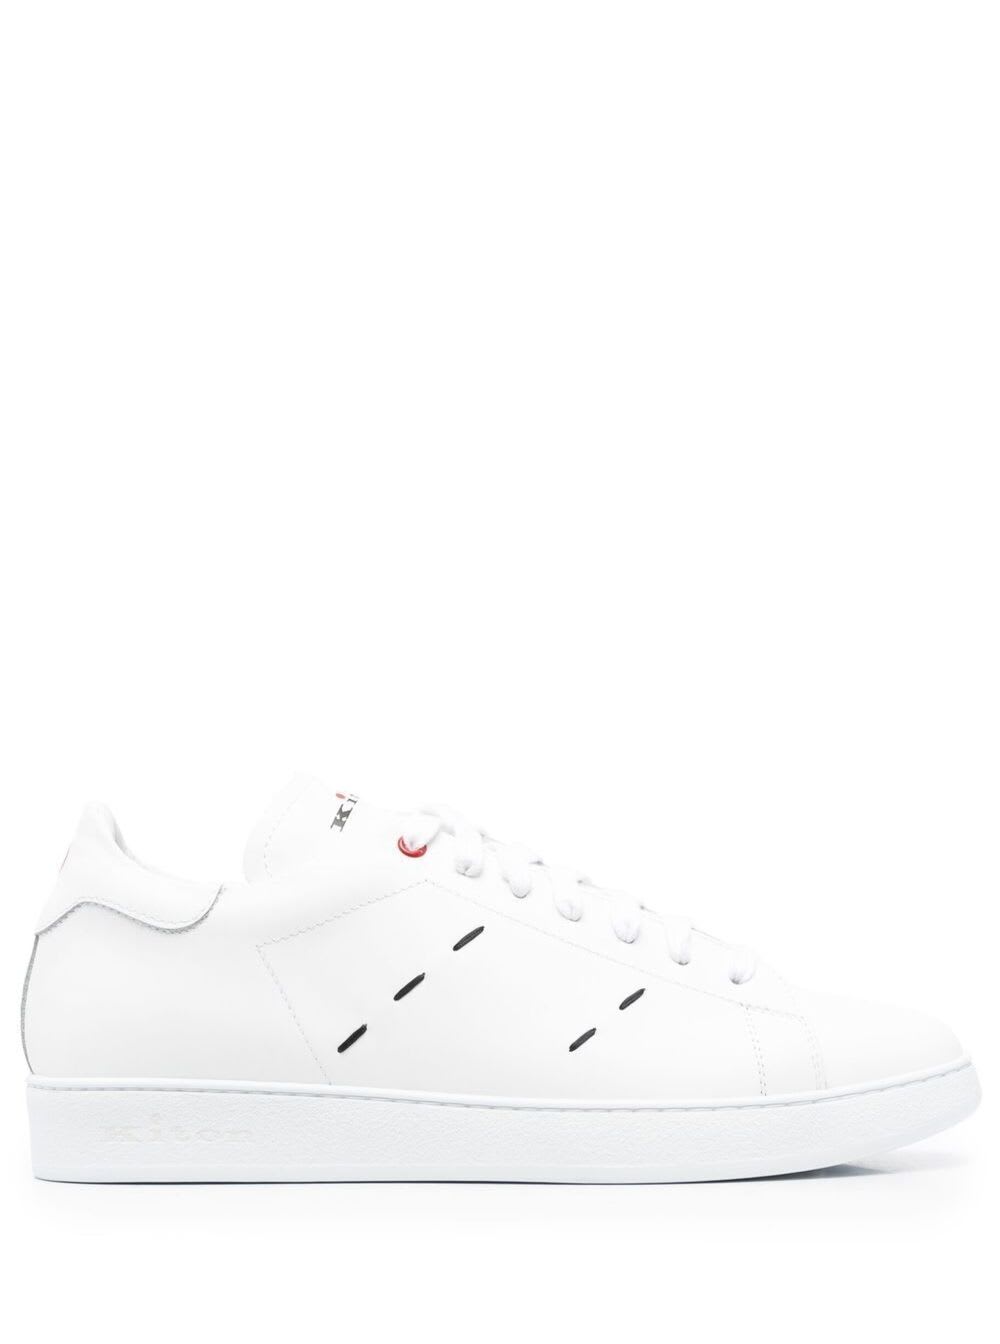 KITON WHITE SNEAKERS WITH CONTRASTING STITCHING IN LEATHER MAN